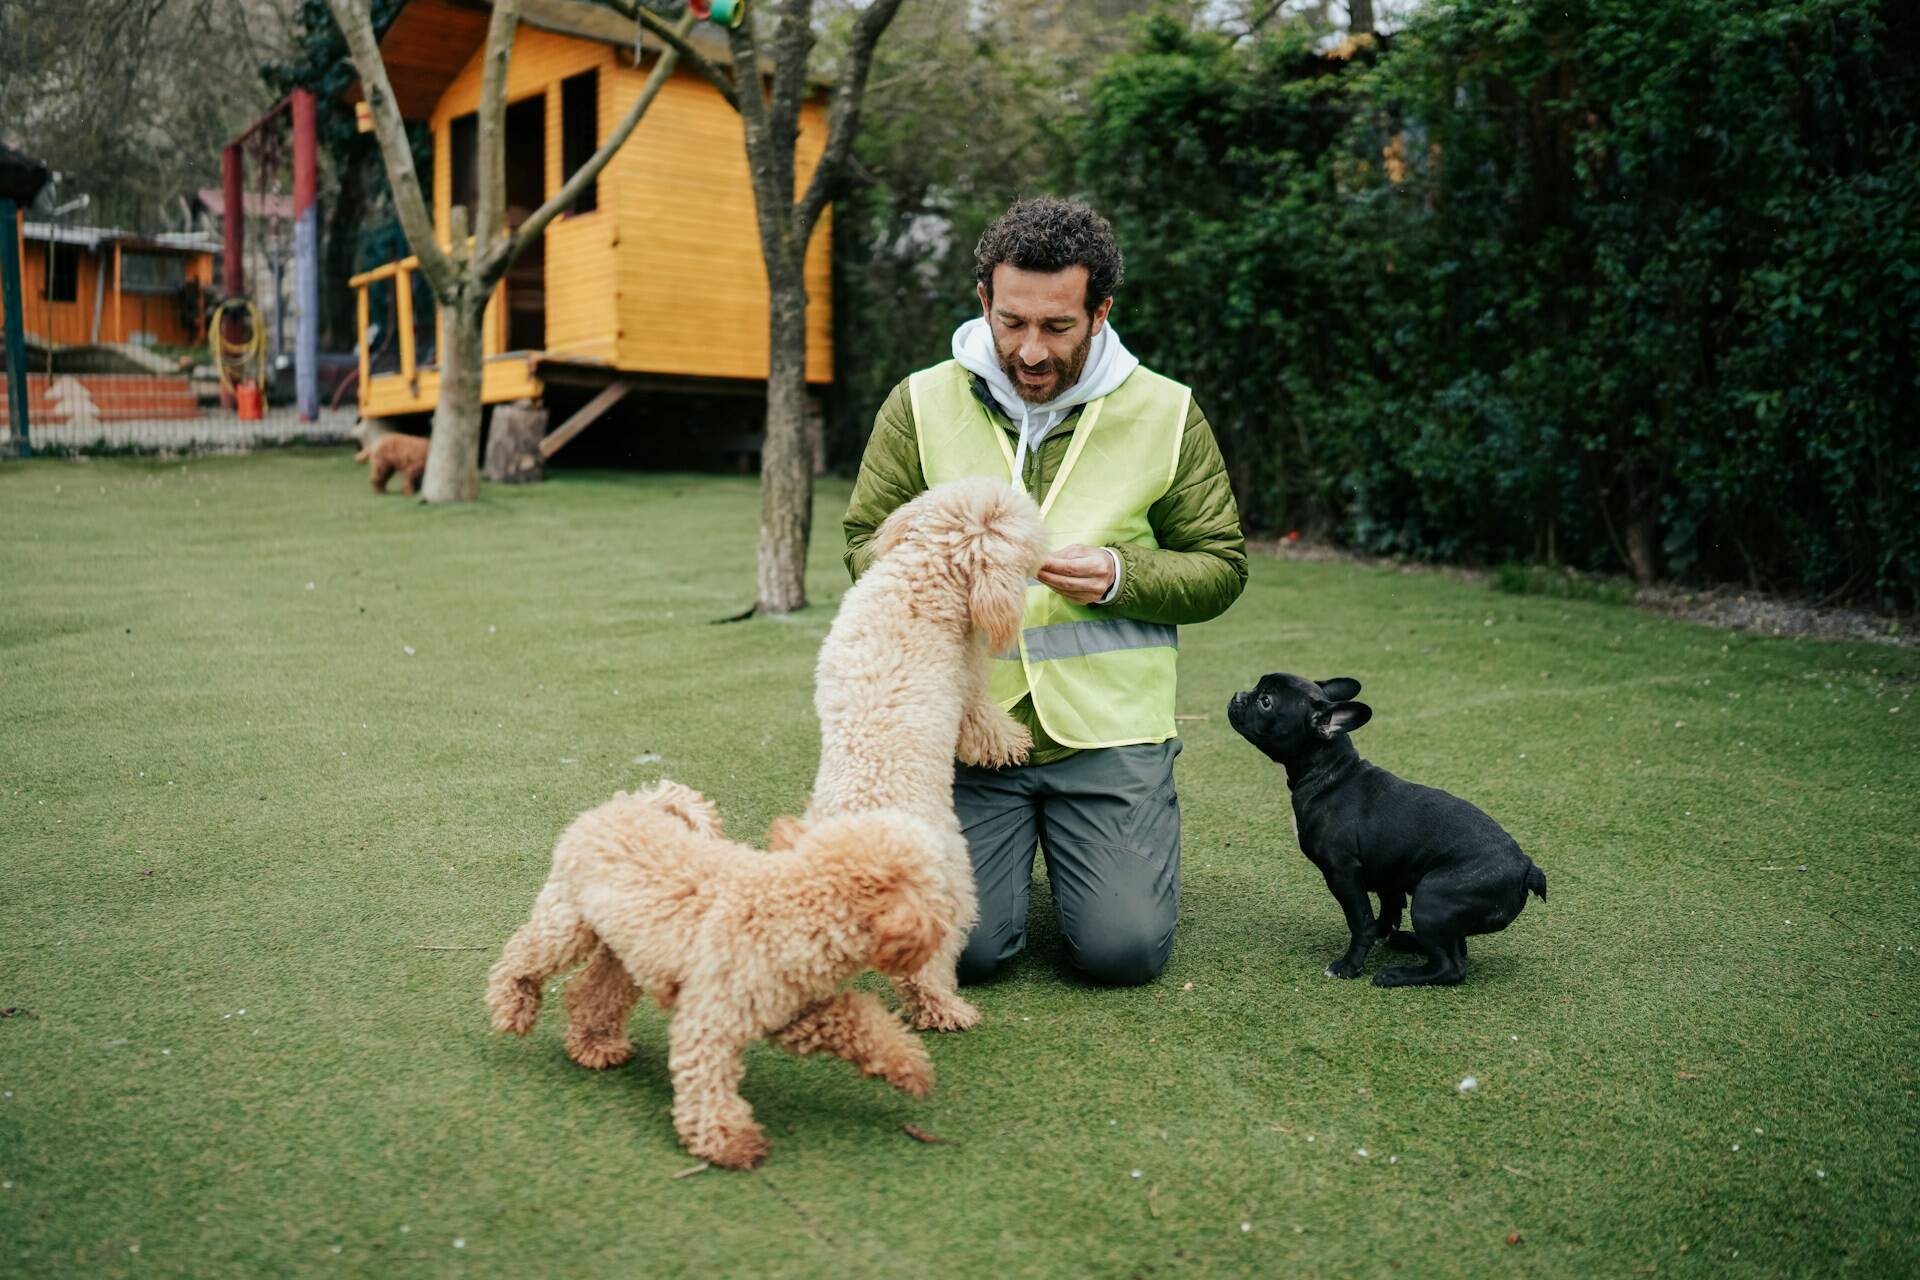 A man in a green vest training three dogs in a lawn